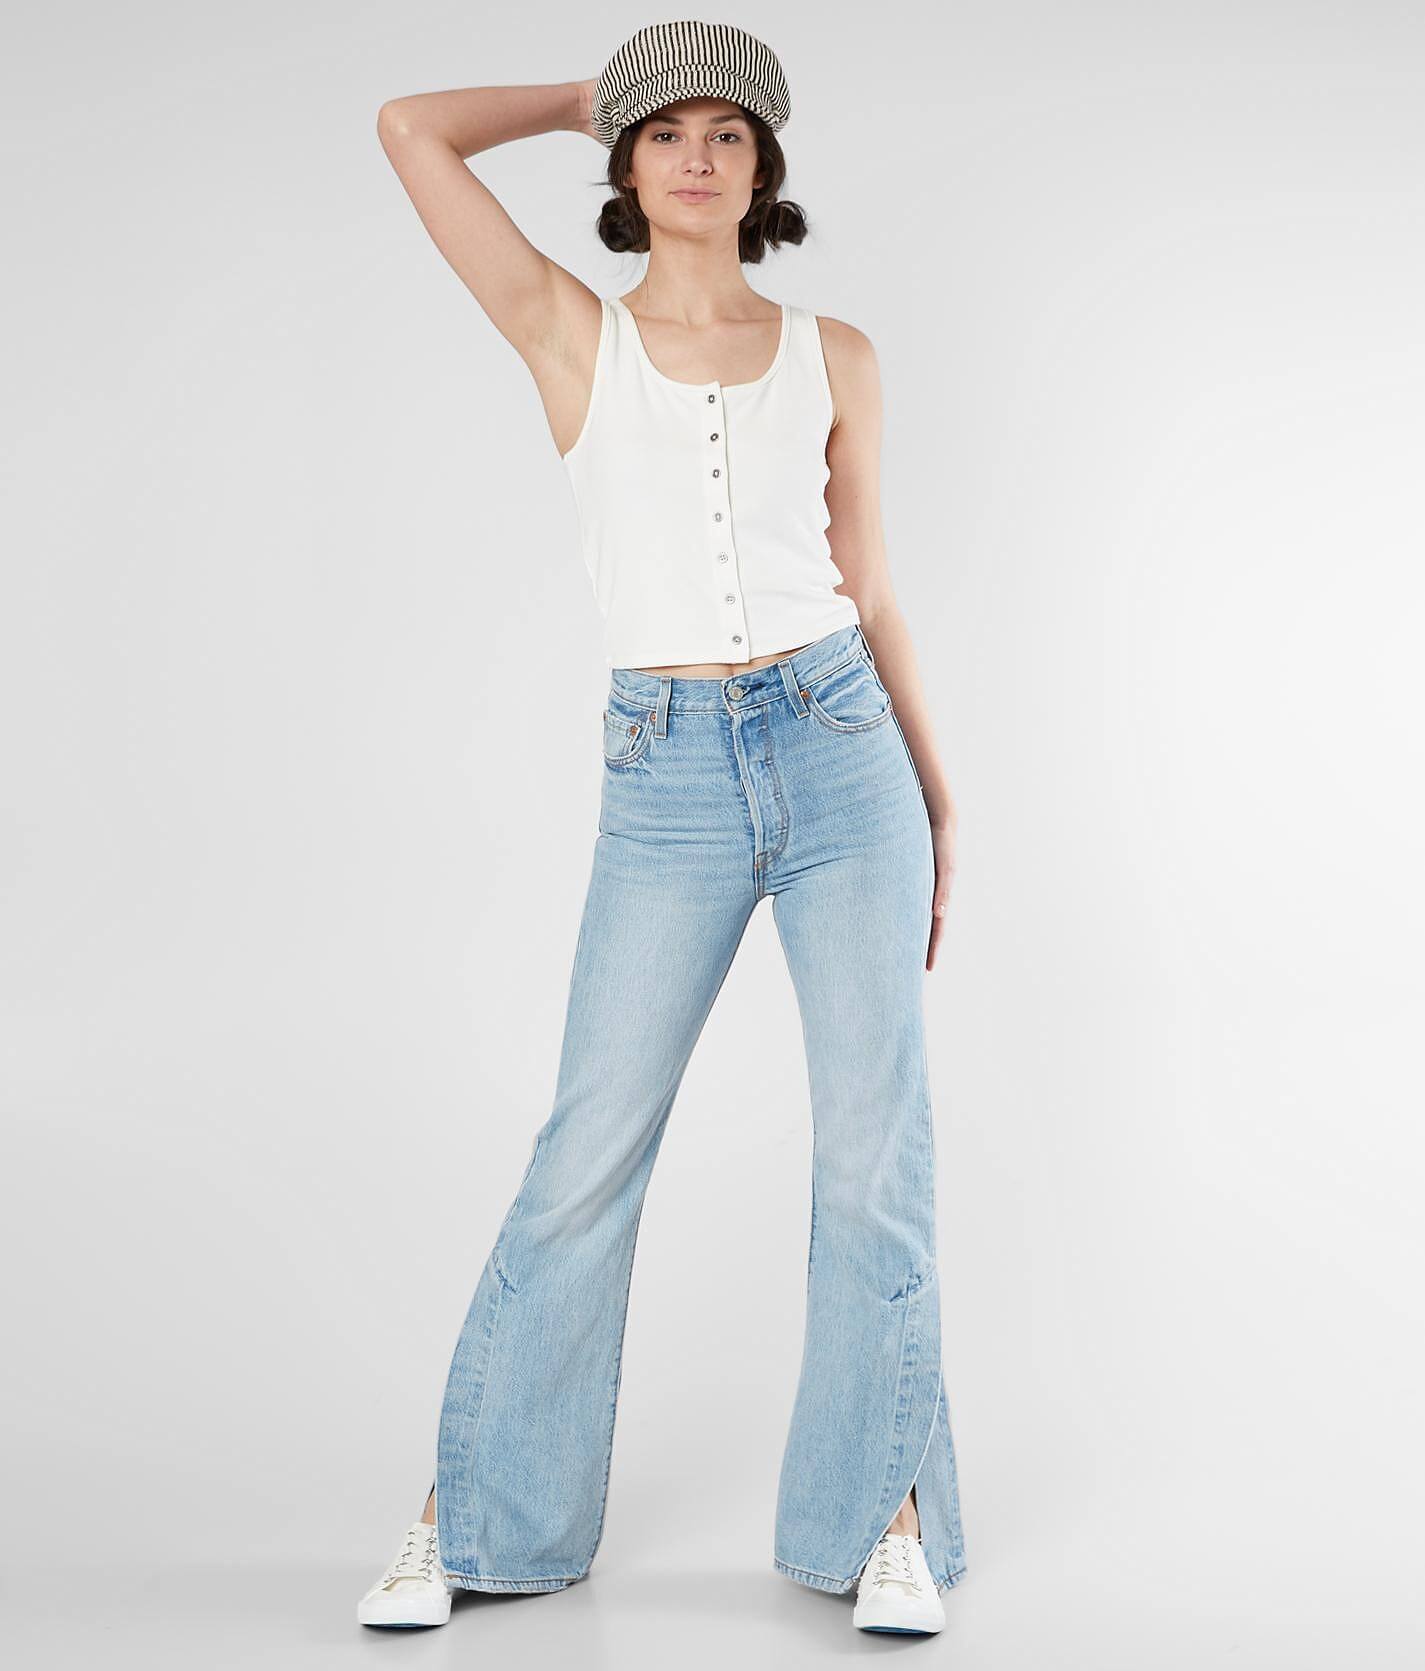 levis jeans flare